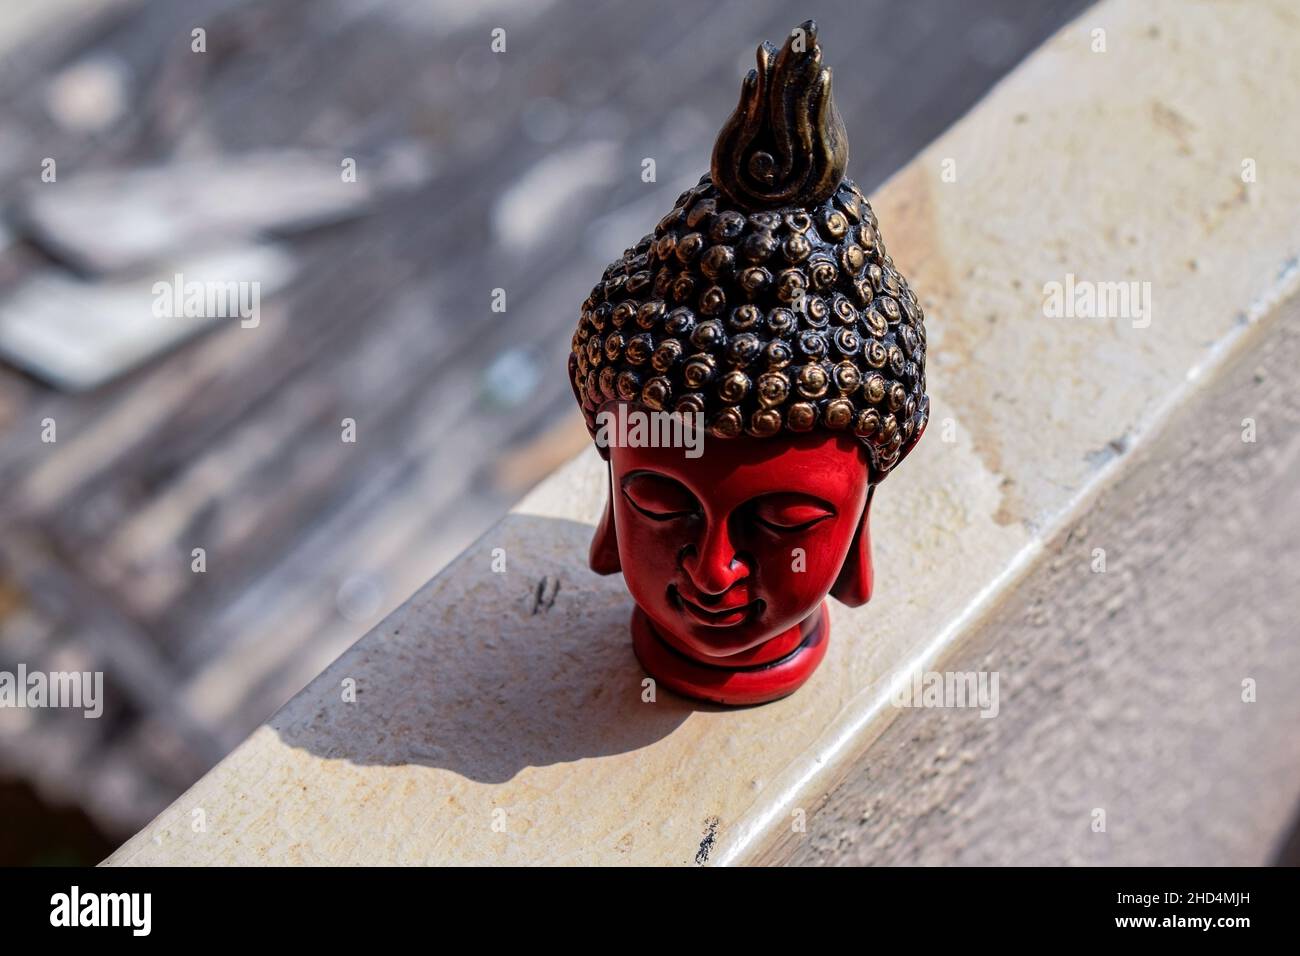 Stock photo of beautiful red color face sculpture or statue of lord buddha, head of statue painted with black and golden color on blur background ,Pic Stock Photo